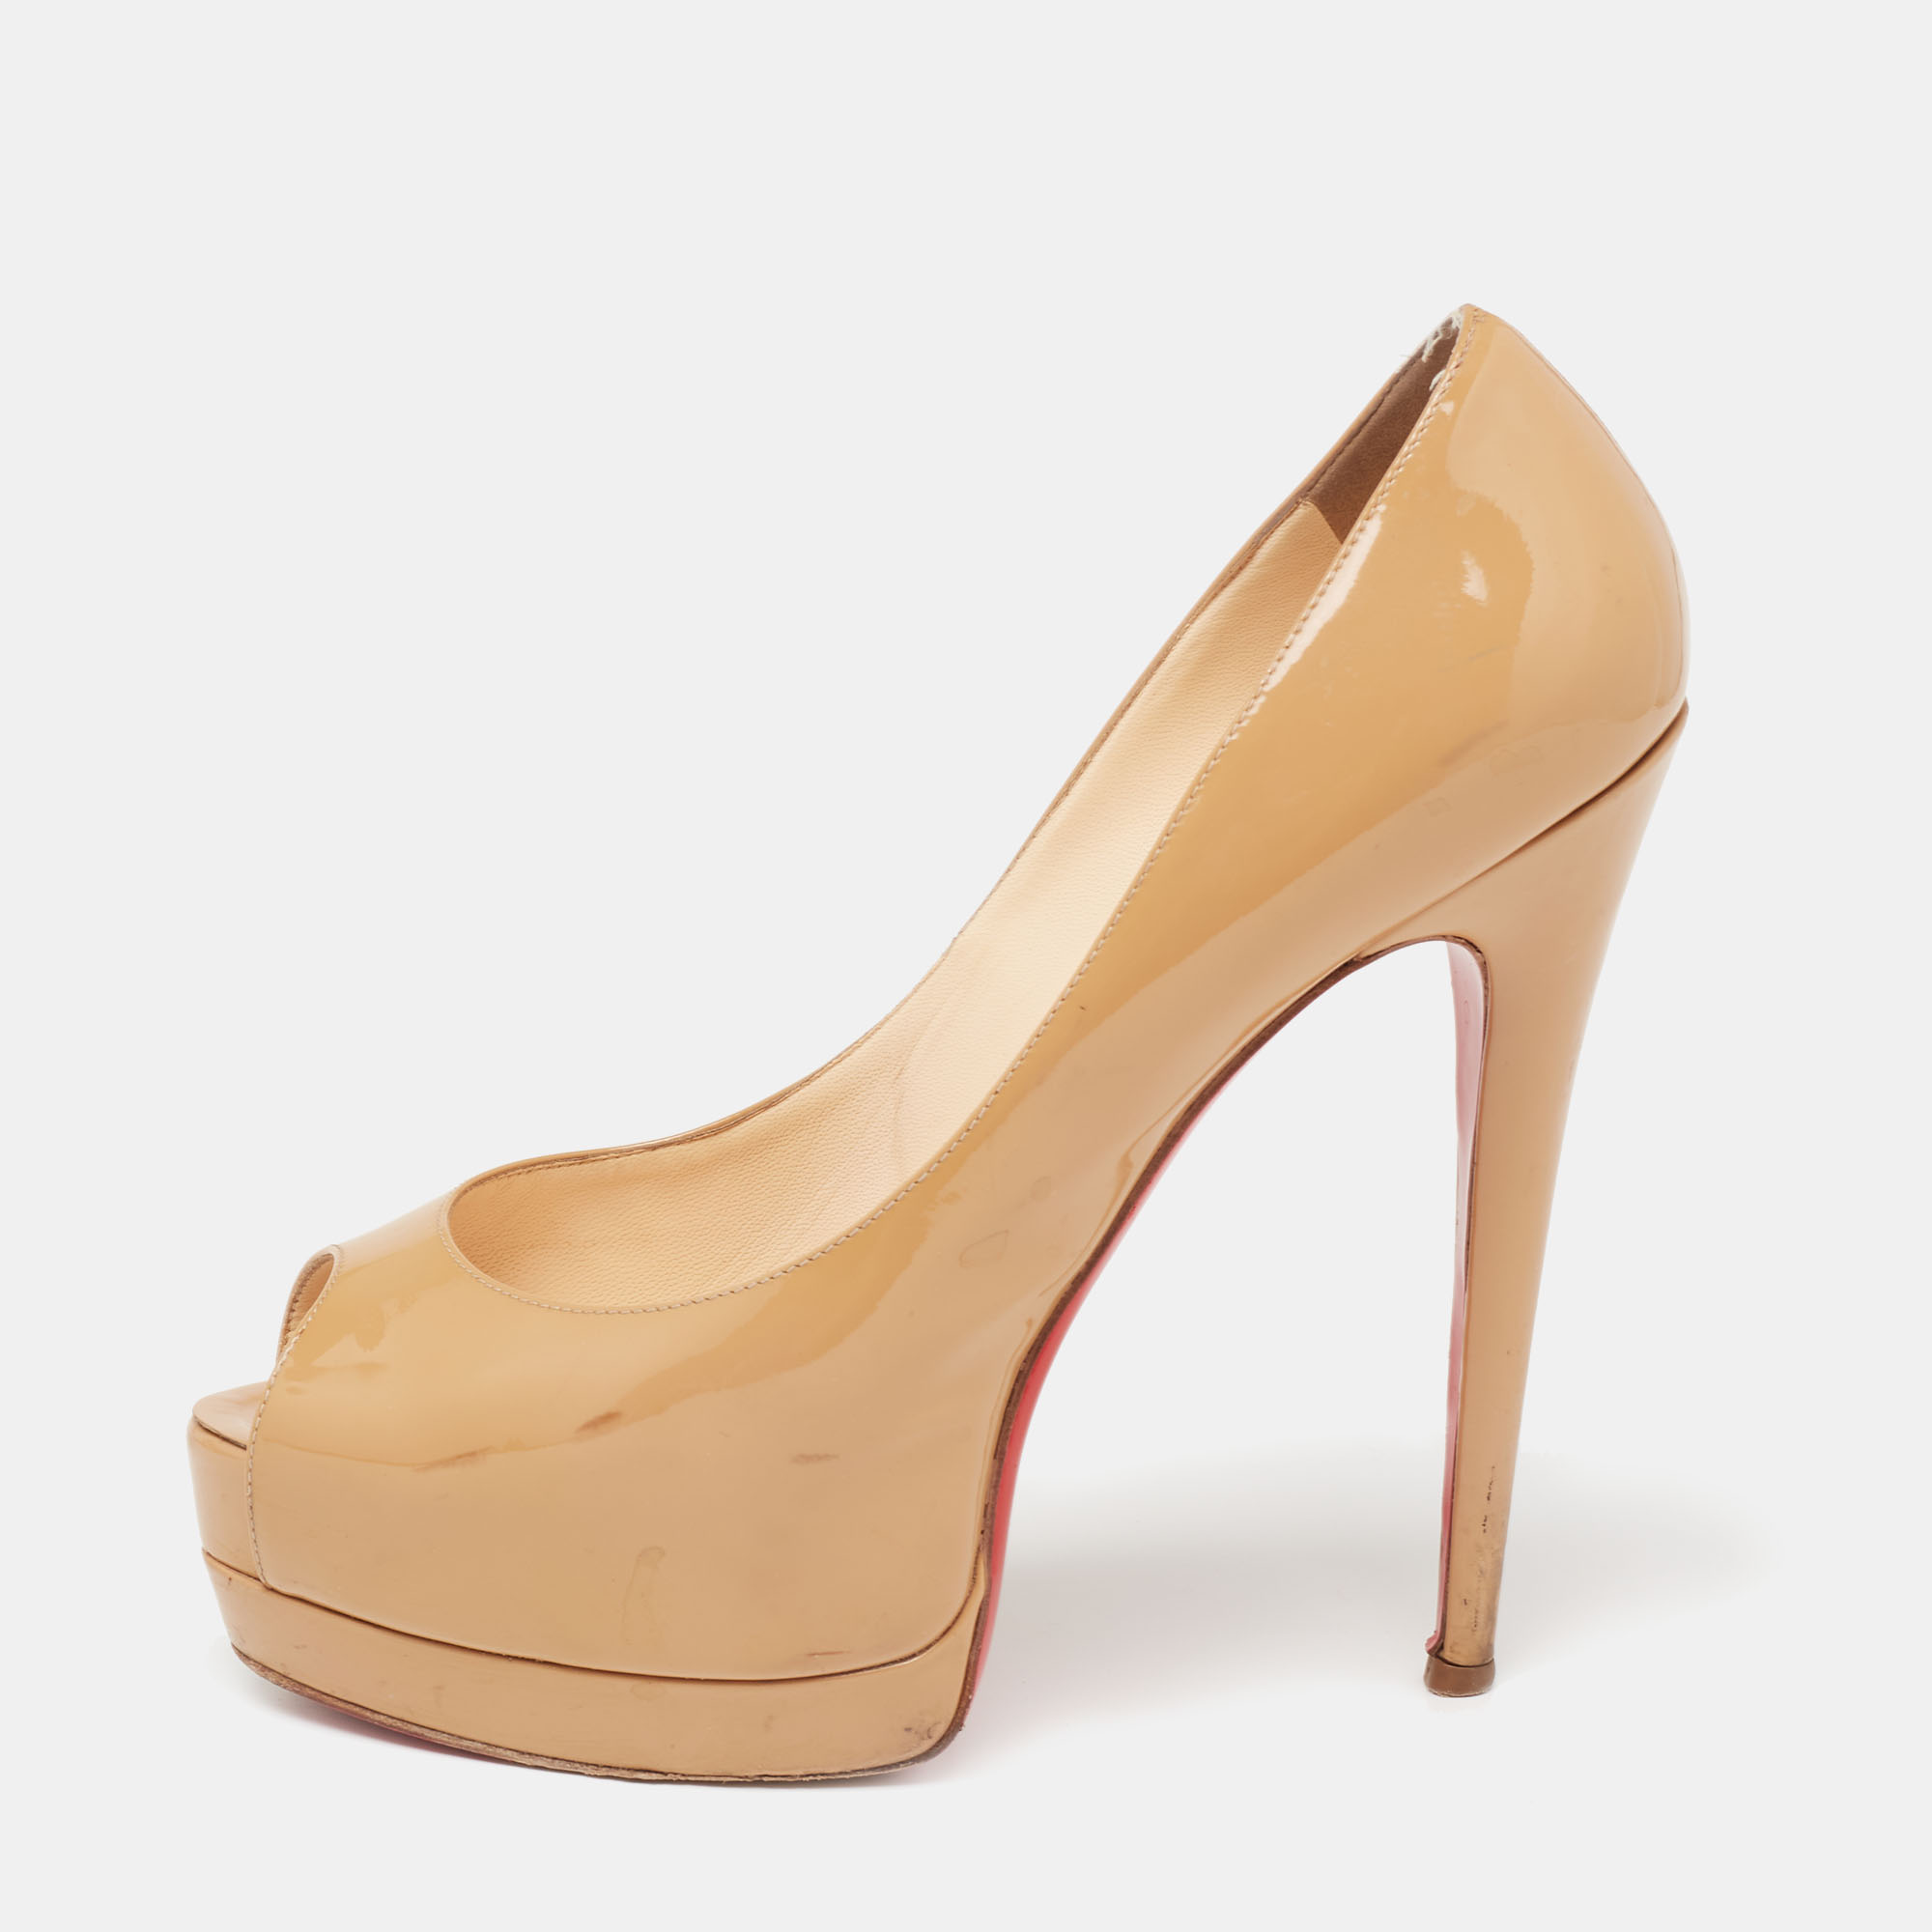 Pre-owned Christian Louboutin Beige Patent Leather New Prive Platform Pumps Size 38.5